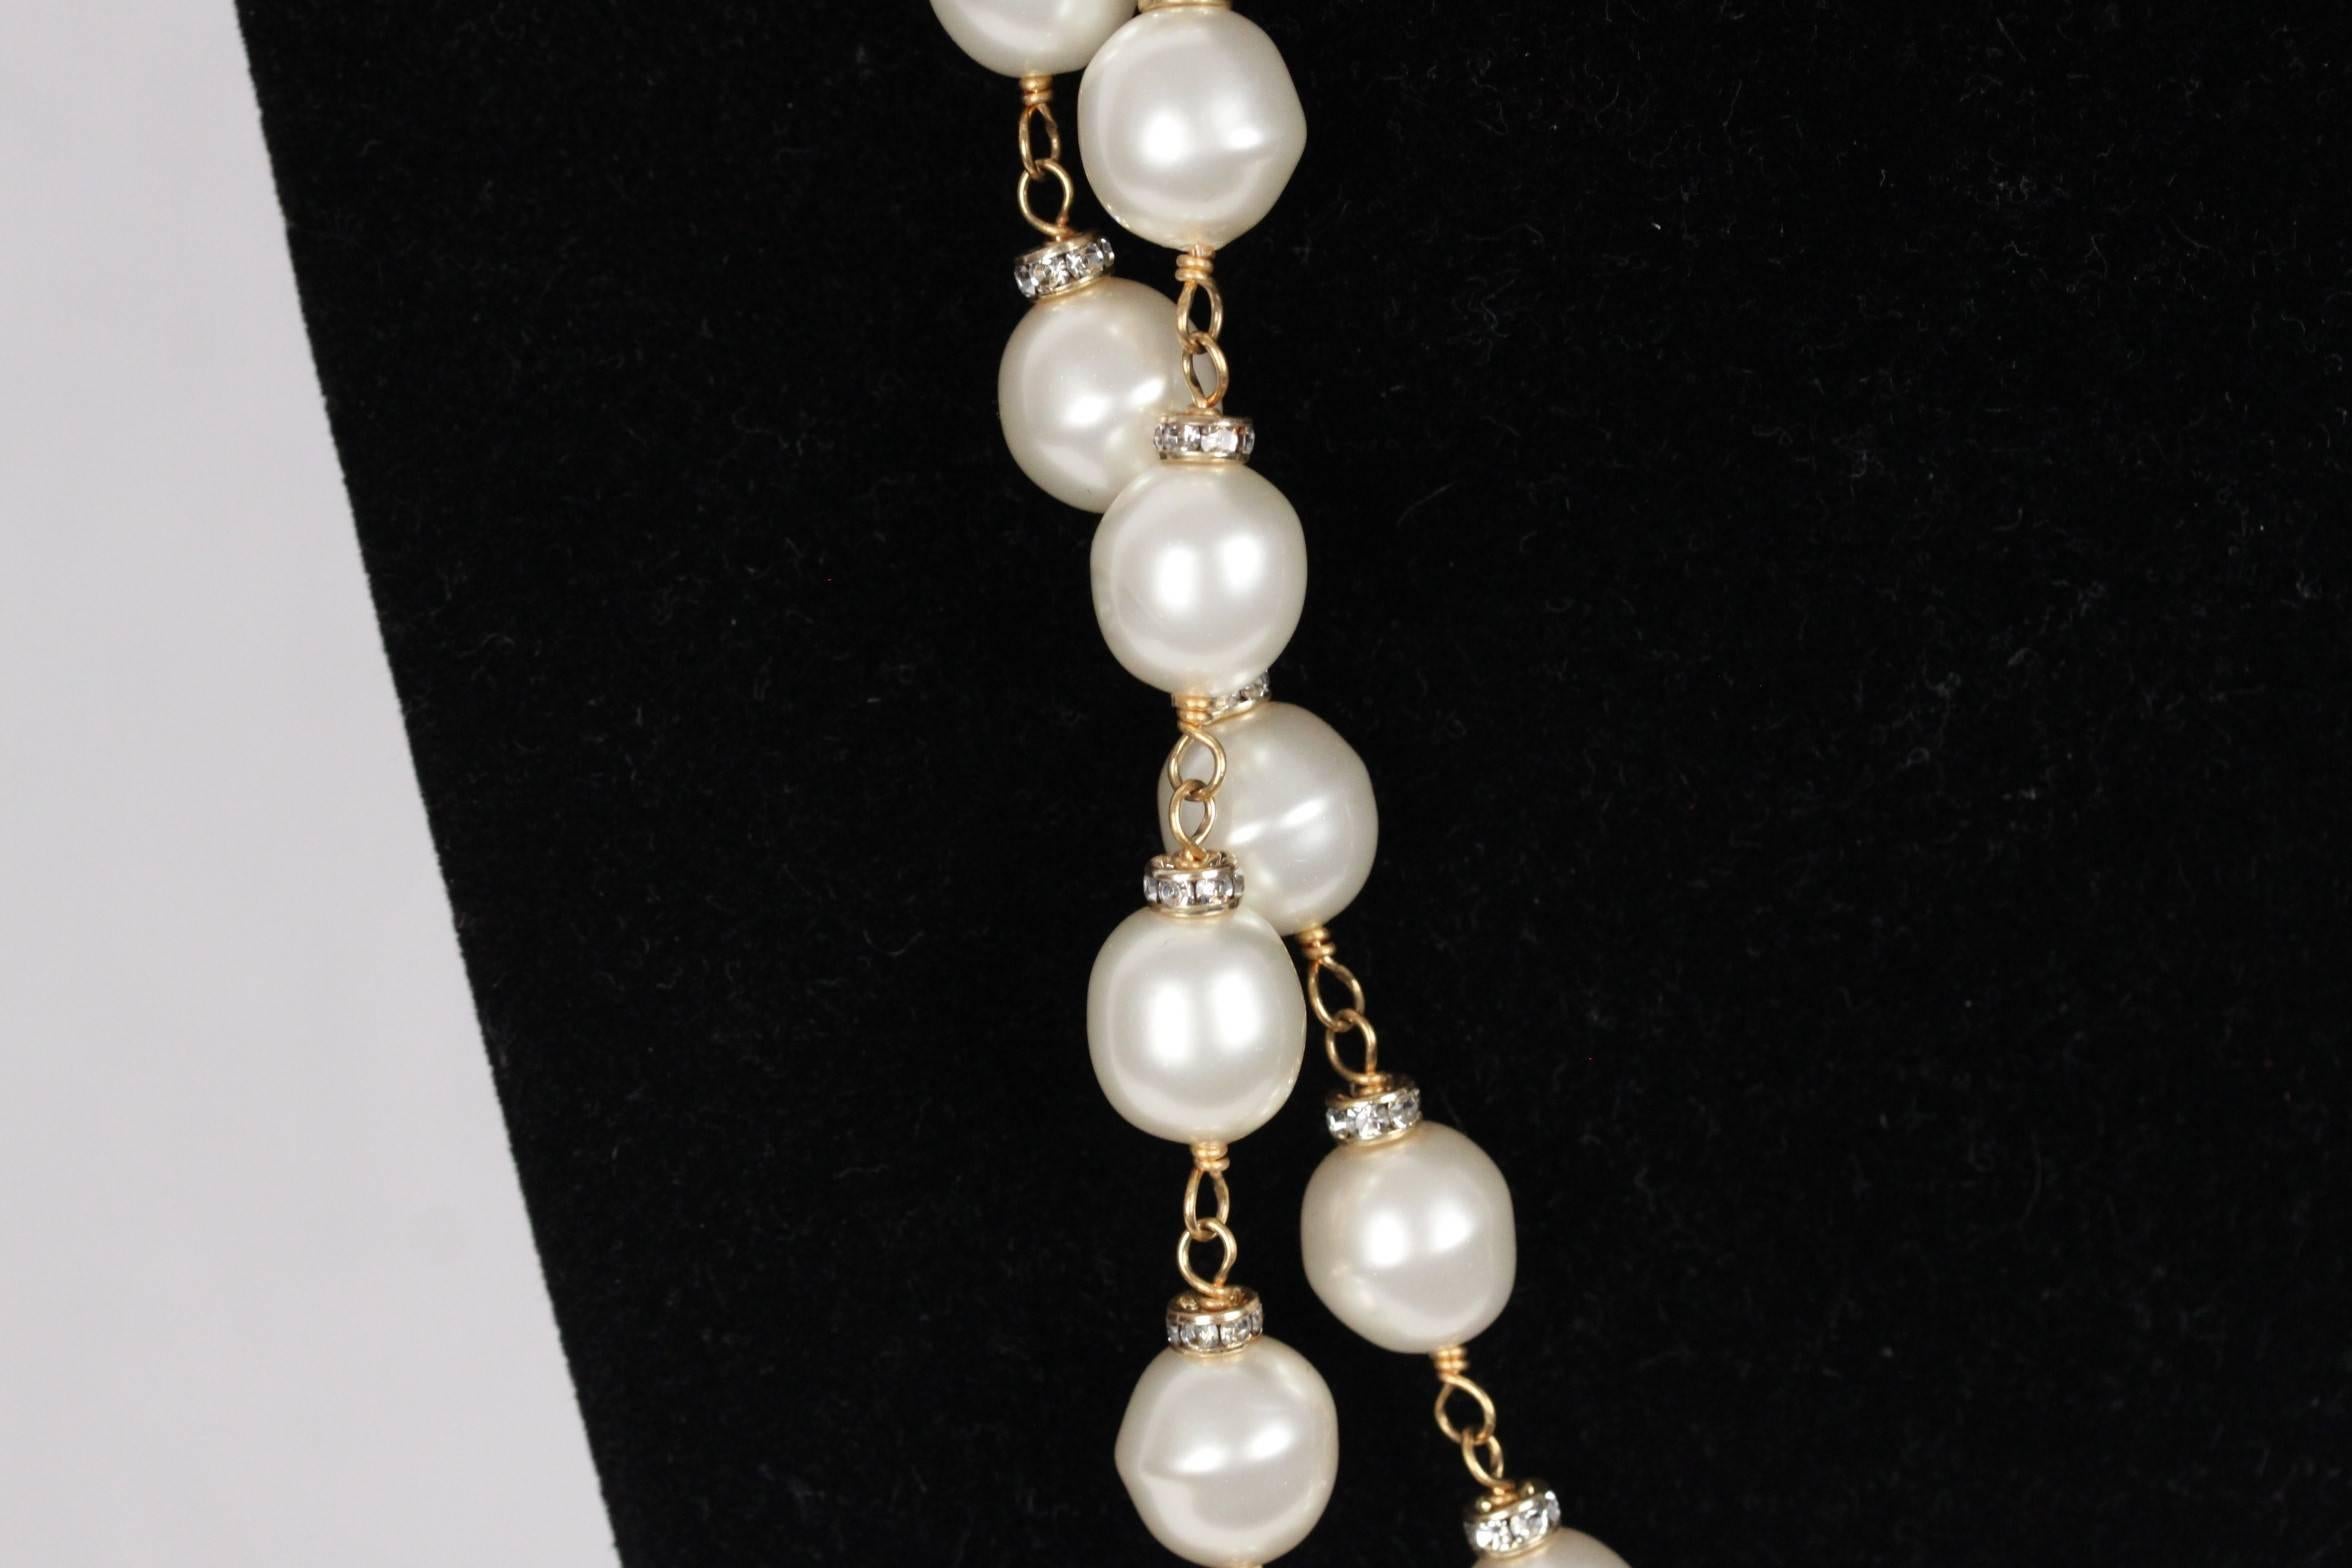 CHANEL Vintage 1984 Gold Metal & Glass PEARL NECKLACE w/ Crystals 1